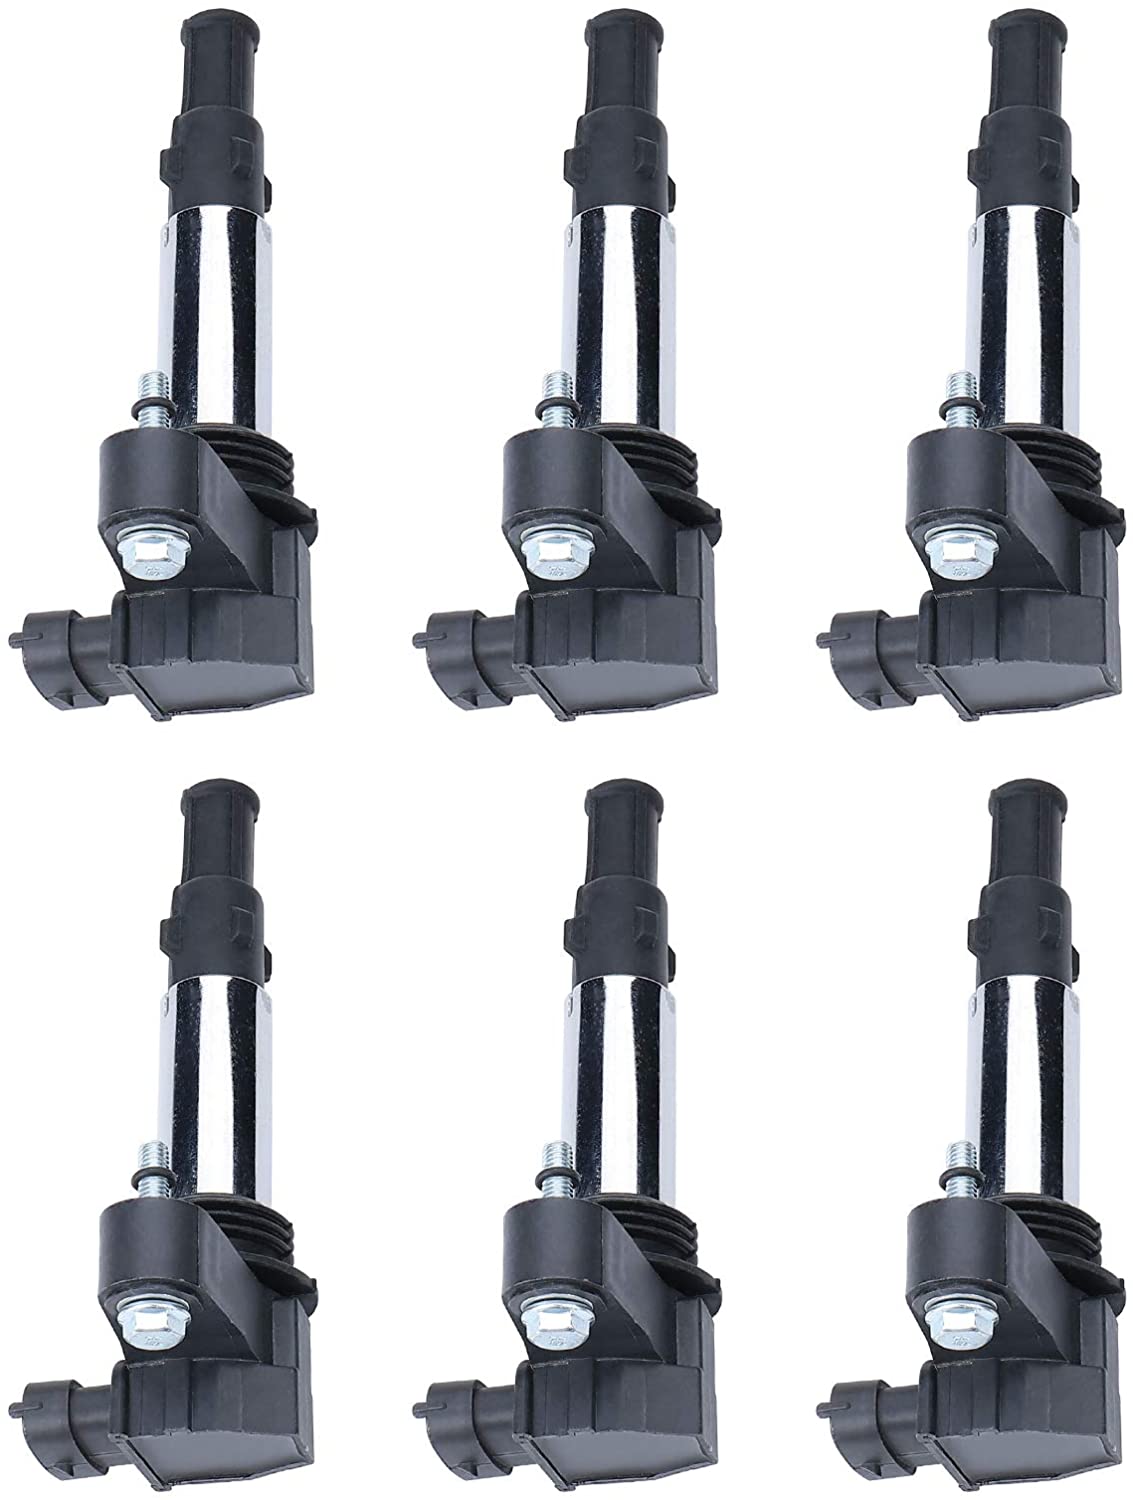 DRIVESTAR UF375 set of 6 Ignition Coils for Cadillic CTS/SRX/STS,for Chevrolet Vectra, for Saab 9-3,for Buick Allure/Enclave/Lacrosse/Rendezvous Traverse Acadia